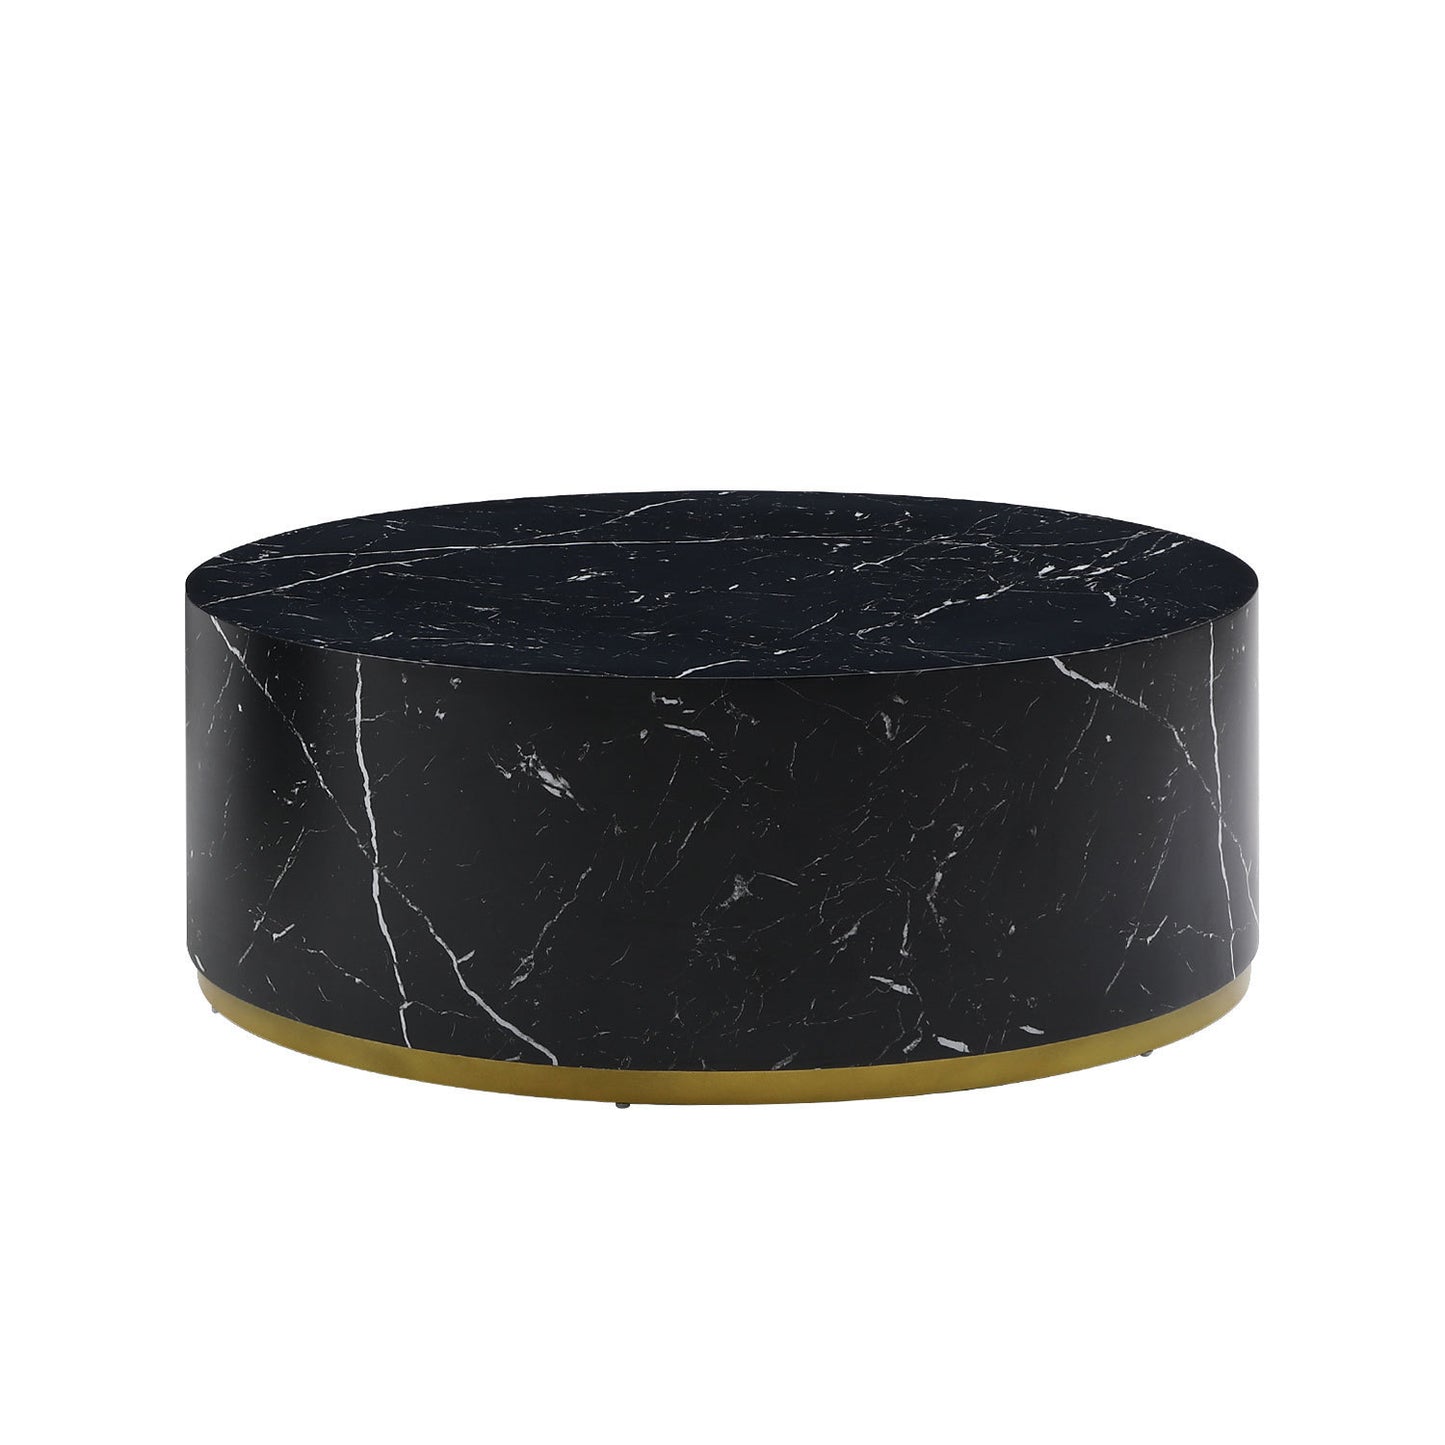 Modern Faux Marble Coffee Tables: 35.43inch Accent Tea Tables with Gold Metal Base in Black Color